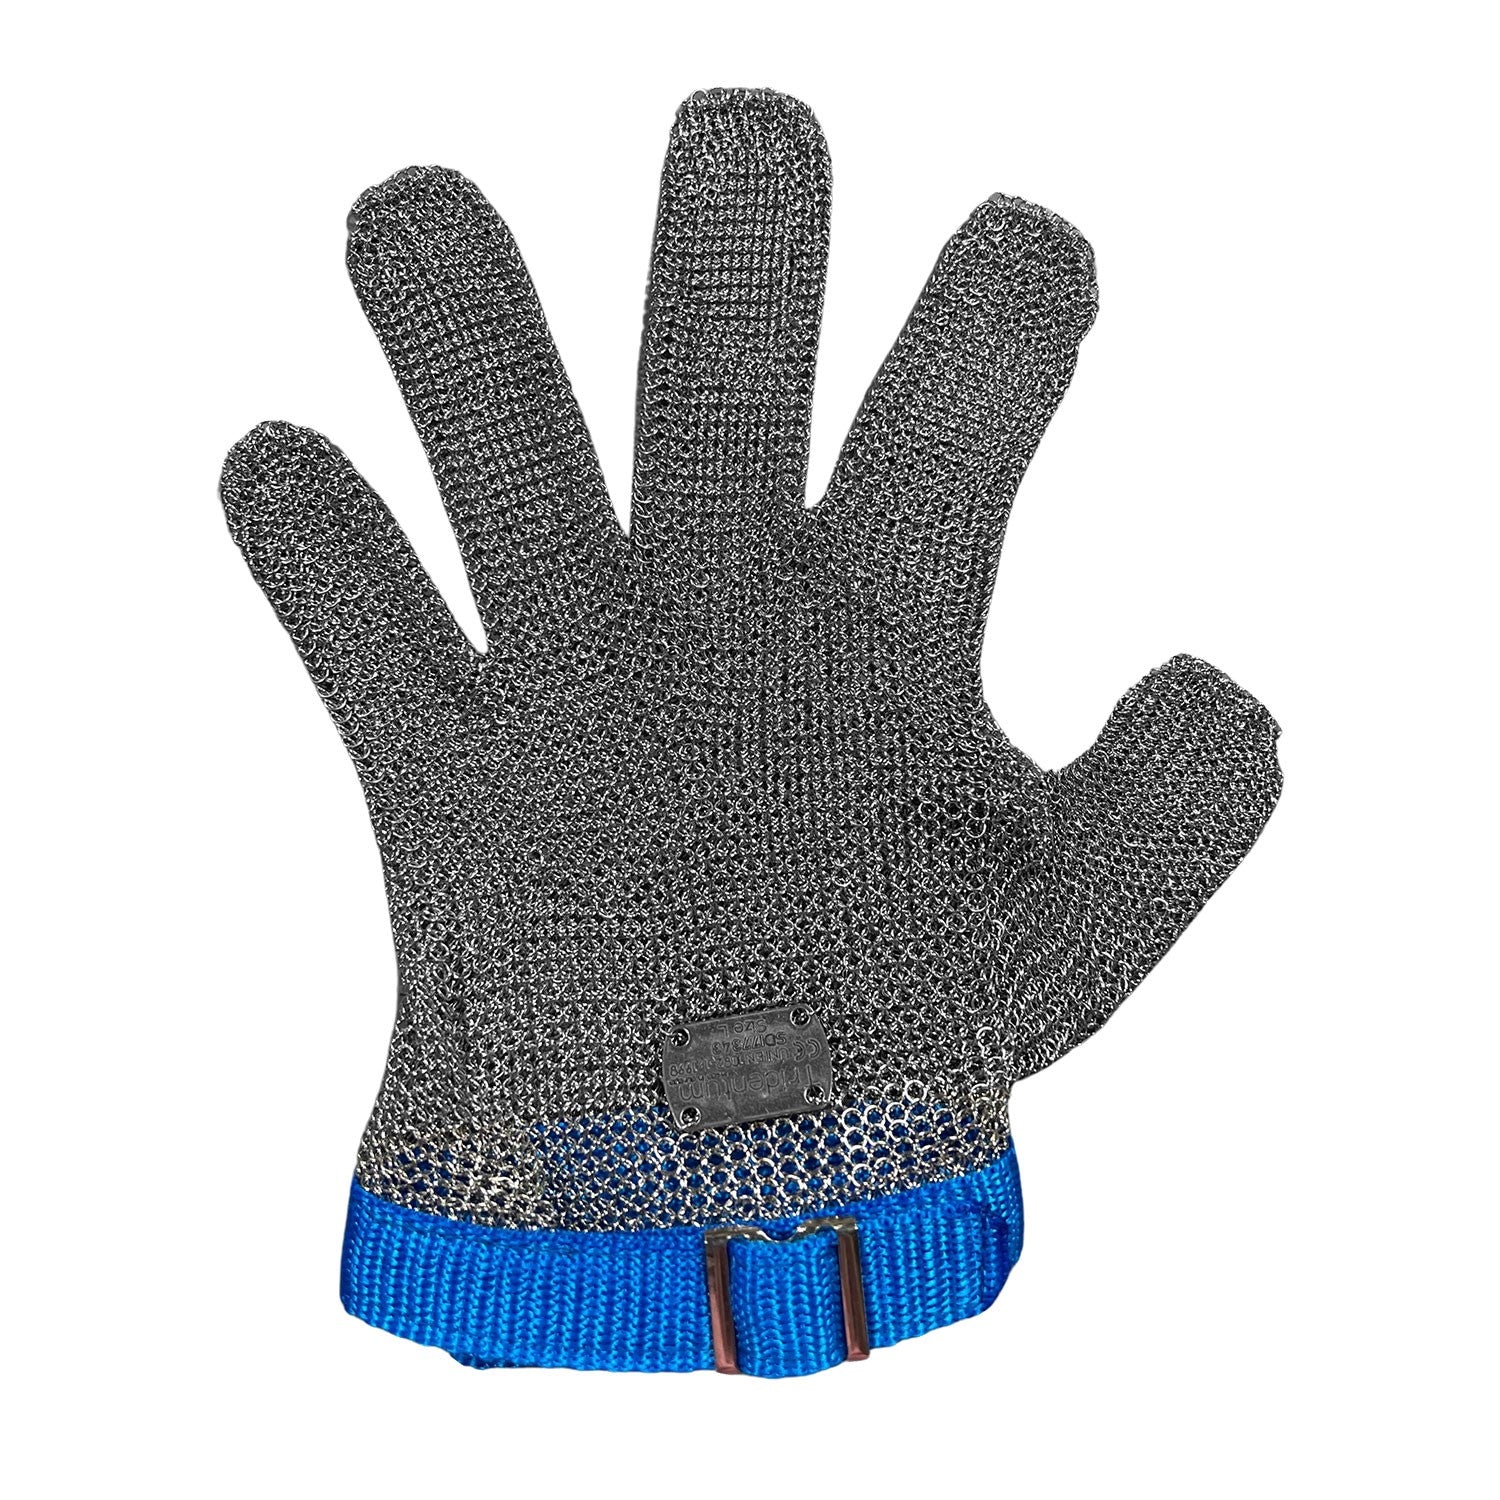 Stainless Steel Mesh Butcher Glove - Large